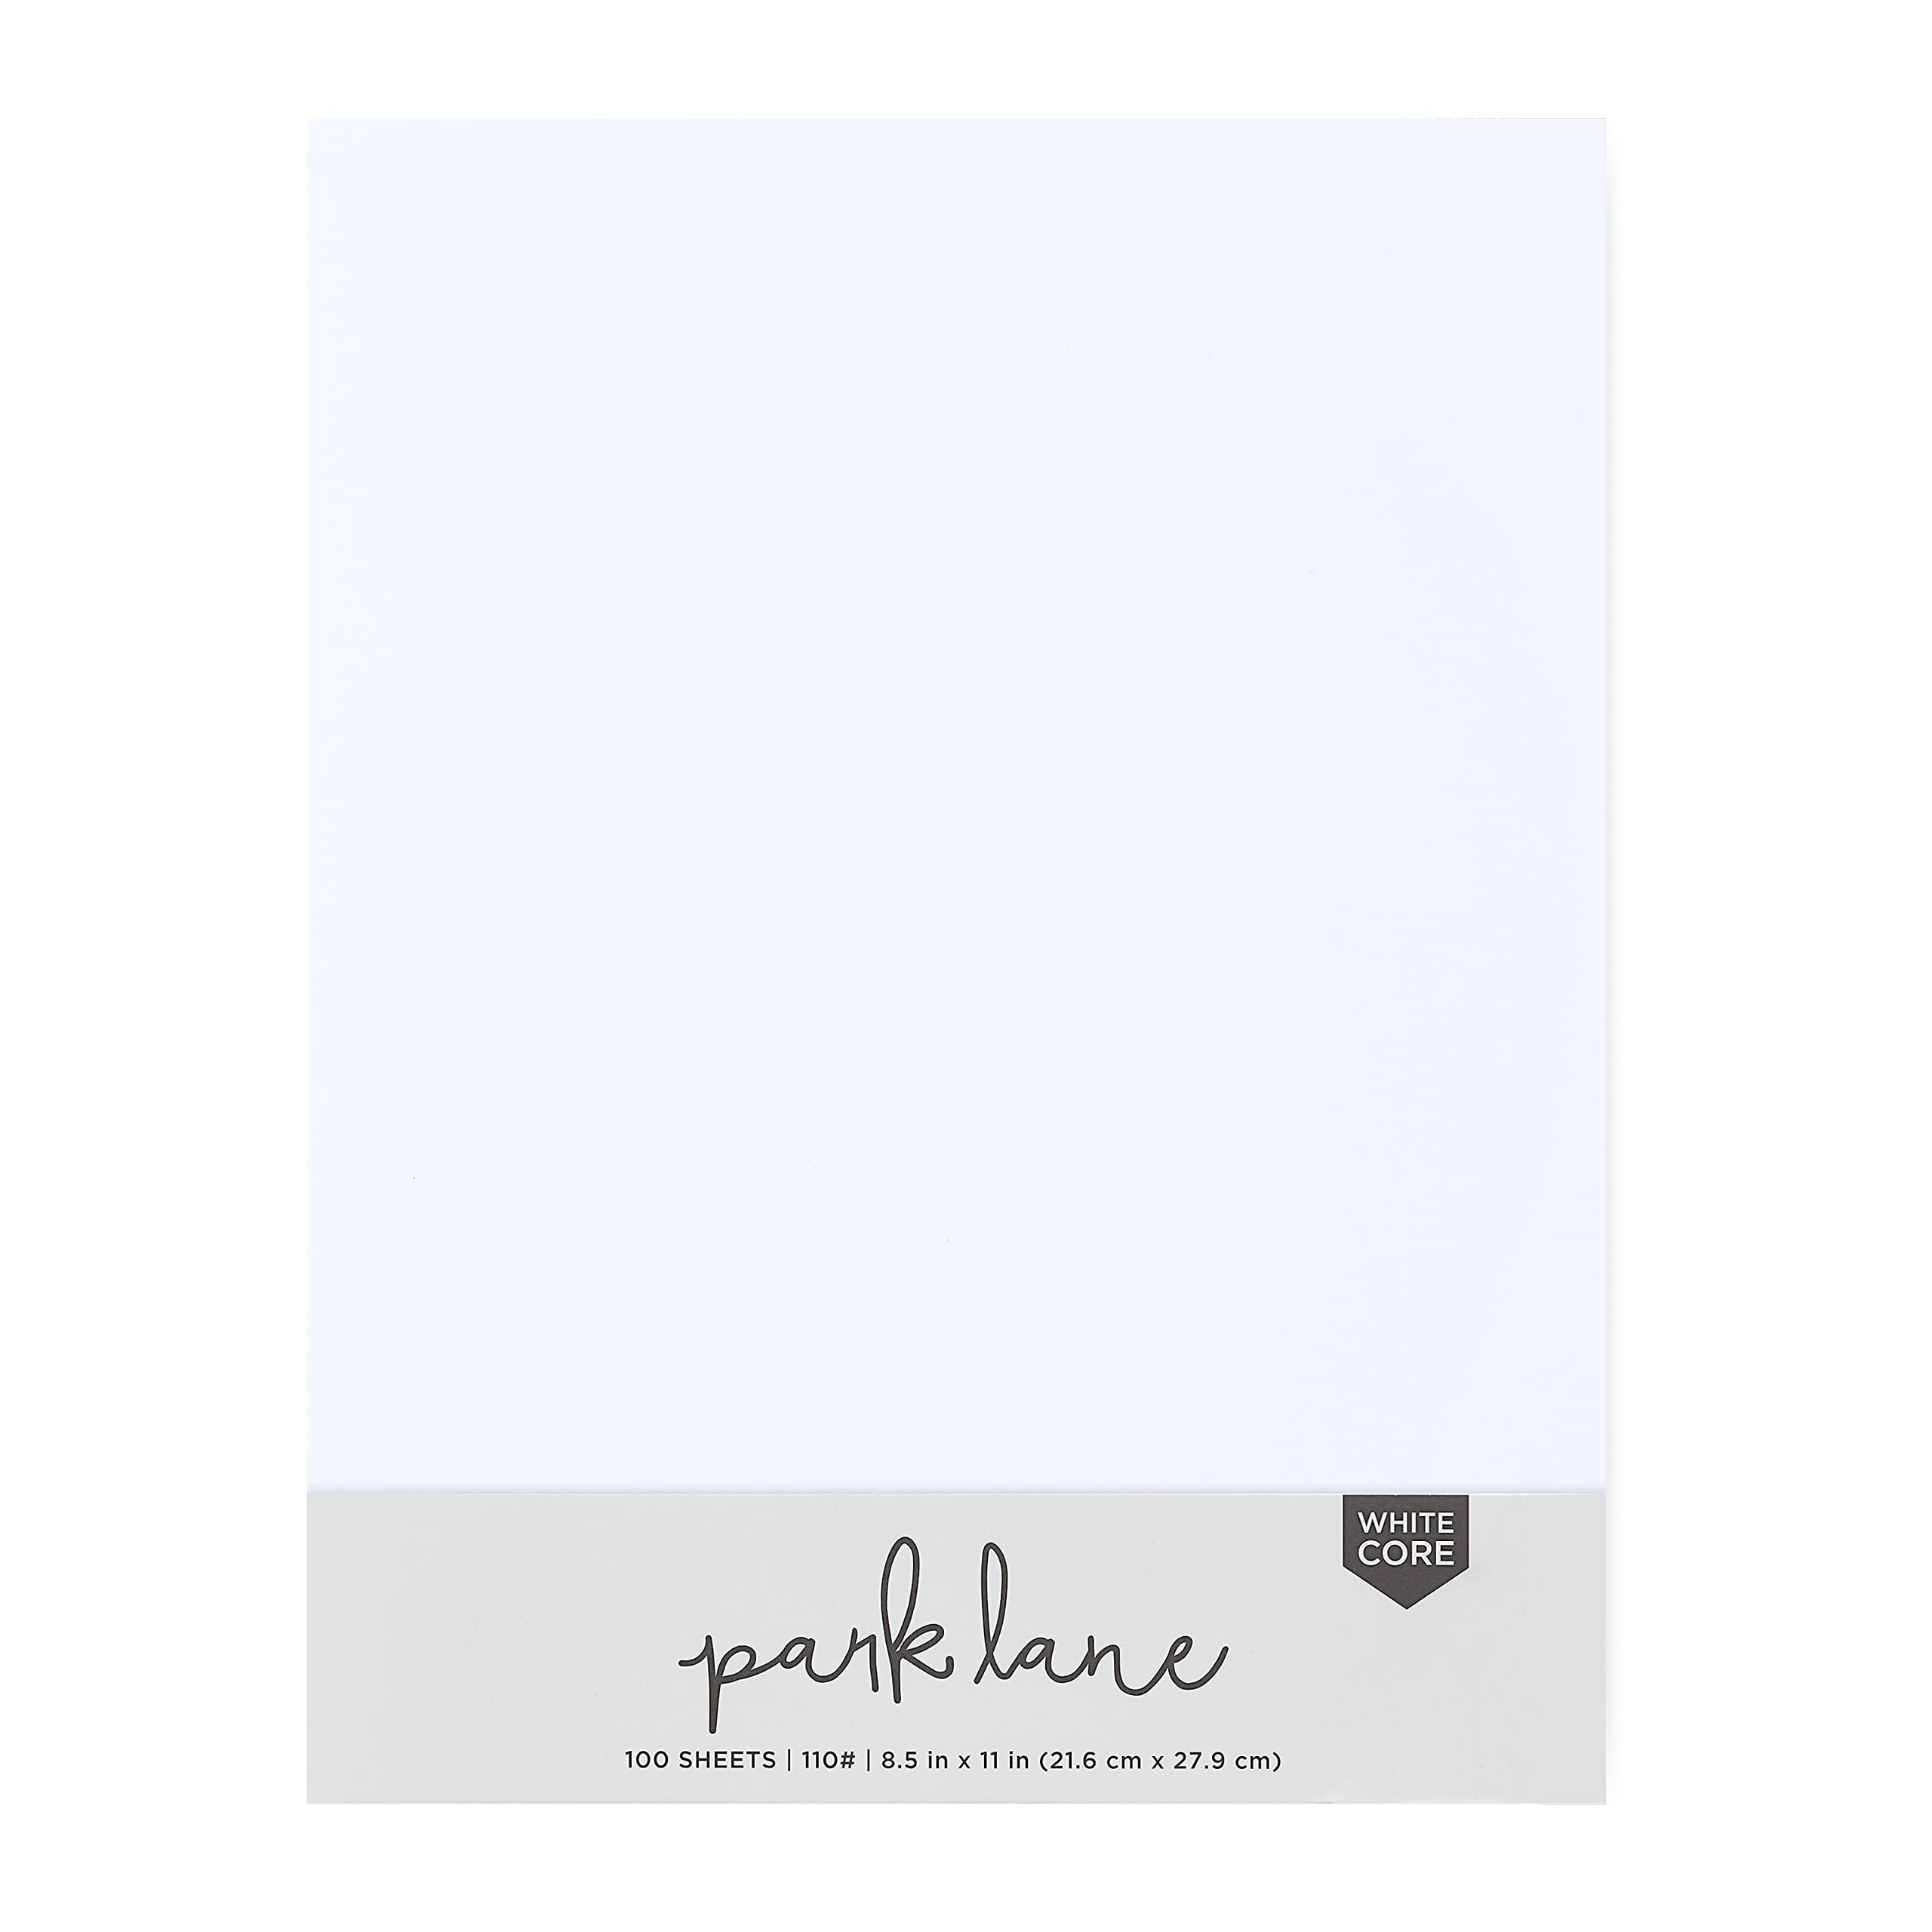 Cardstock 8.5 x 11 Paper Pack - 110 lb White Cardstock Scrapbook Paper -  Double Sided Card Stock for Crafts, Embossing, Cardmaking - 100 Sheets